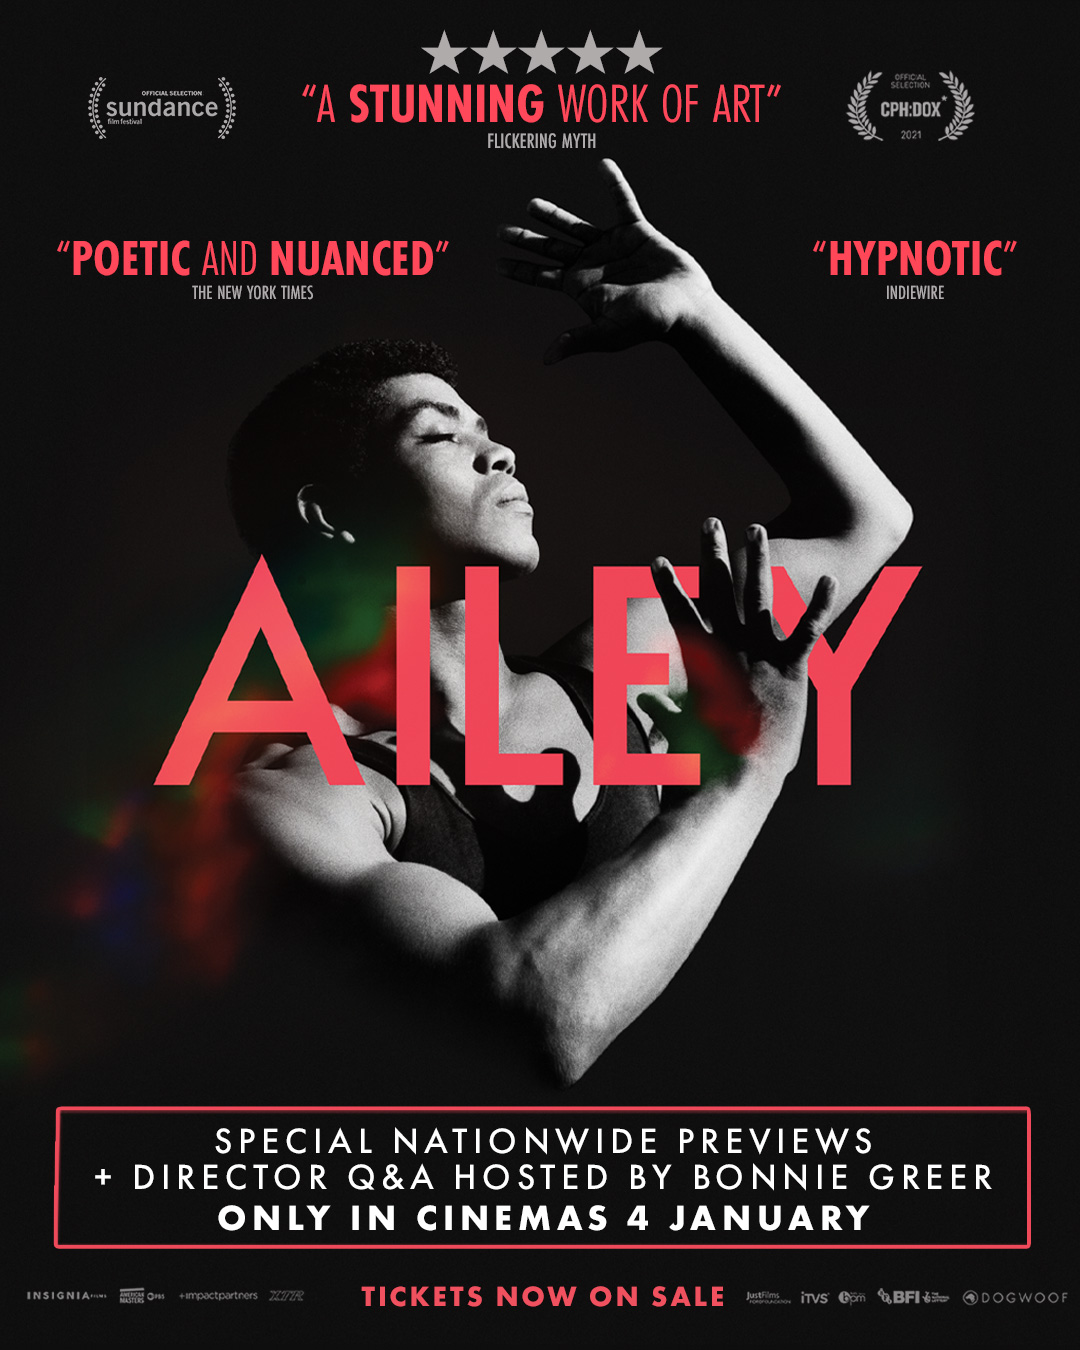 Ailey opens at a cinema near you on January 7.